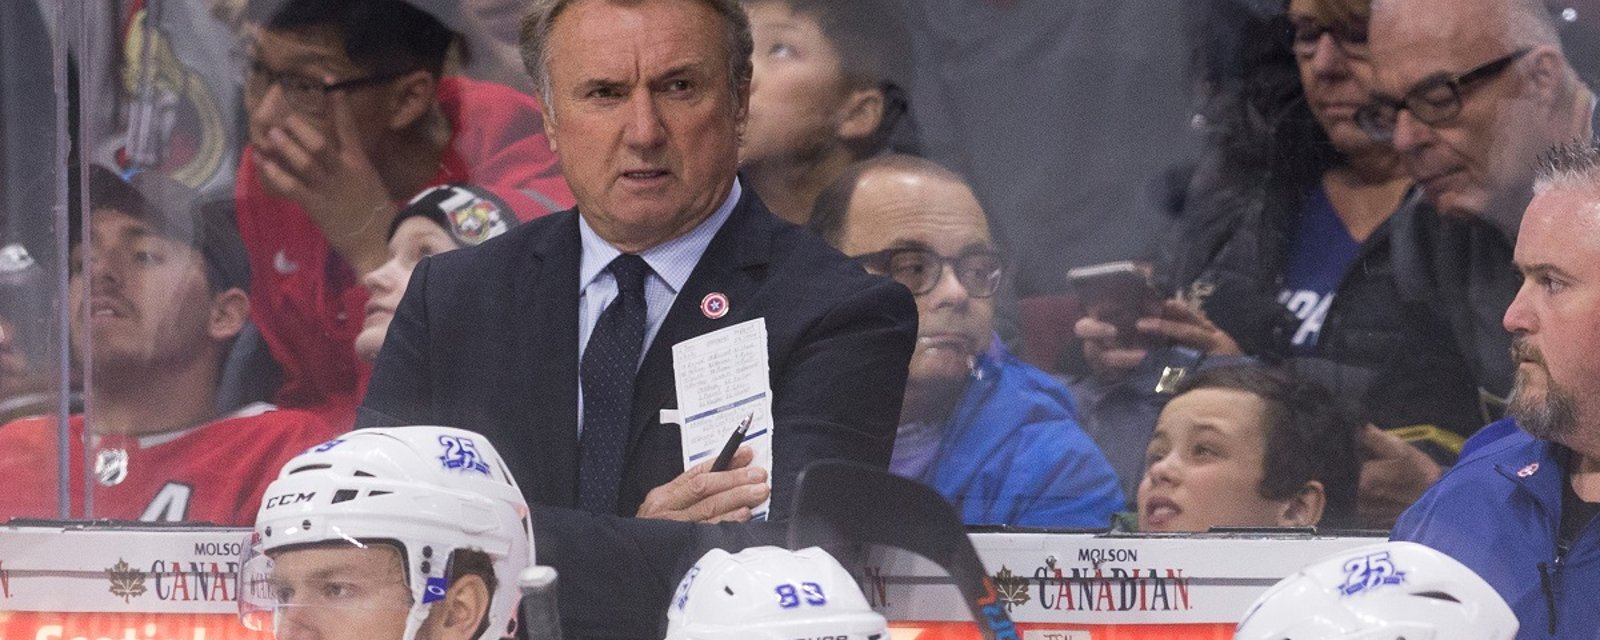 Report: Rick Bowness labels 3 players “unfit to play” for Game 1.